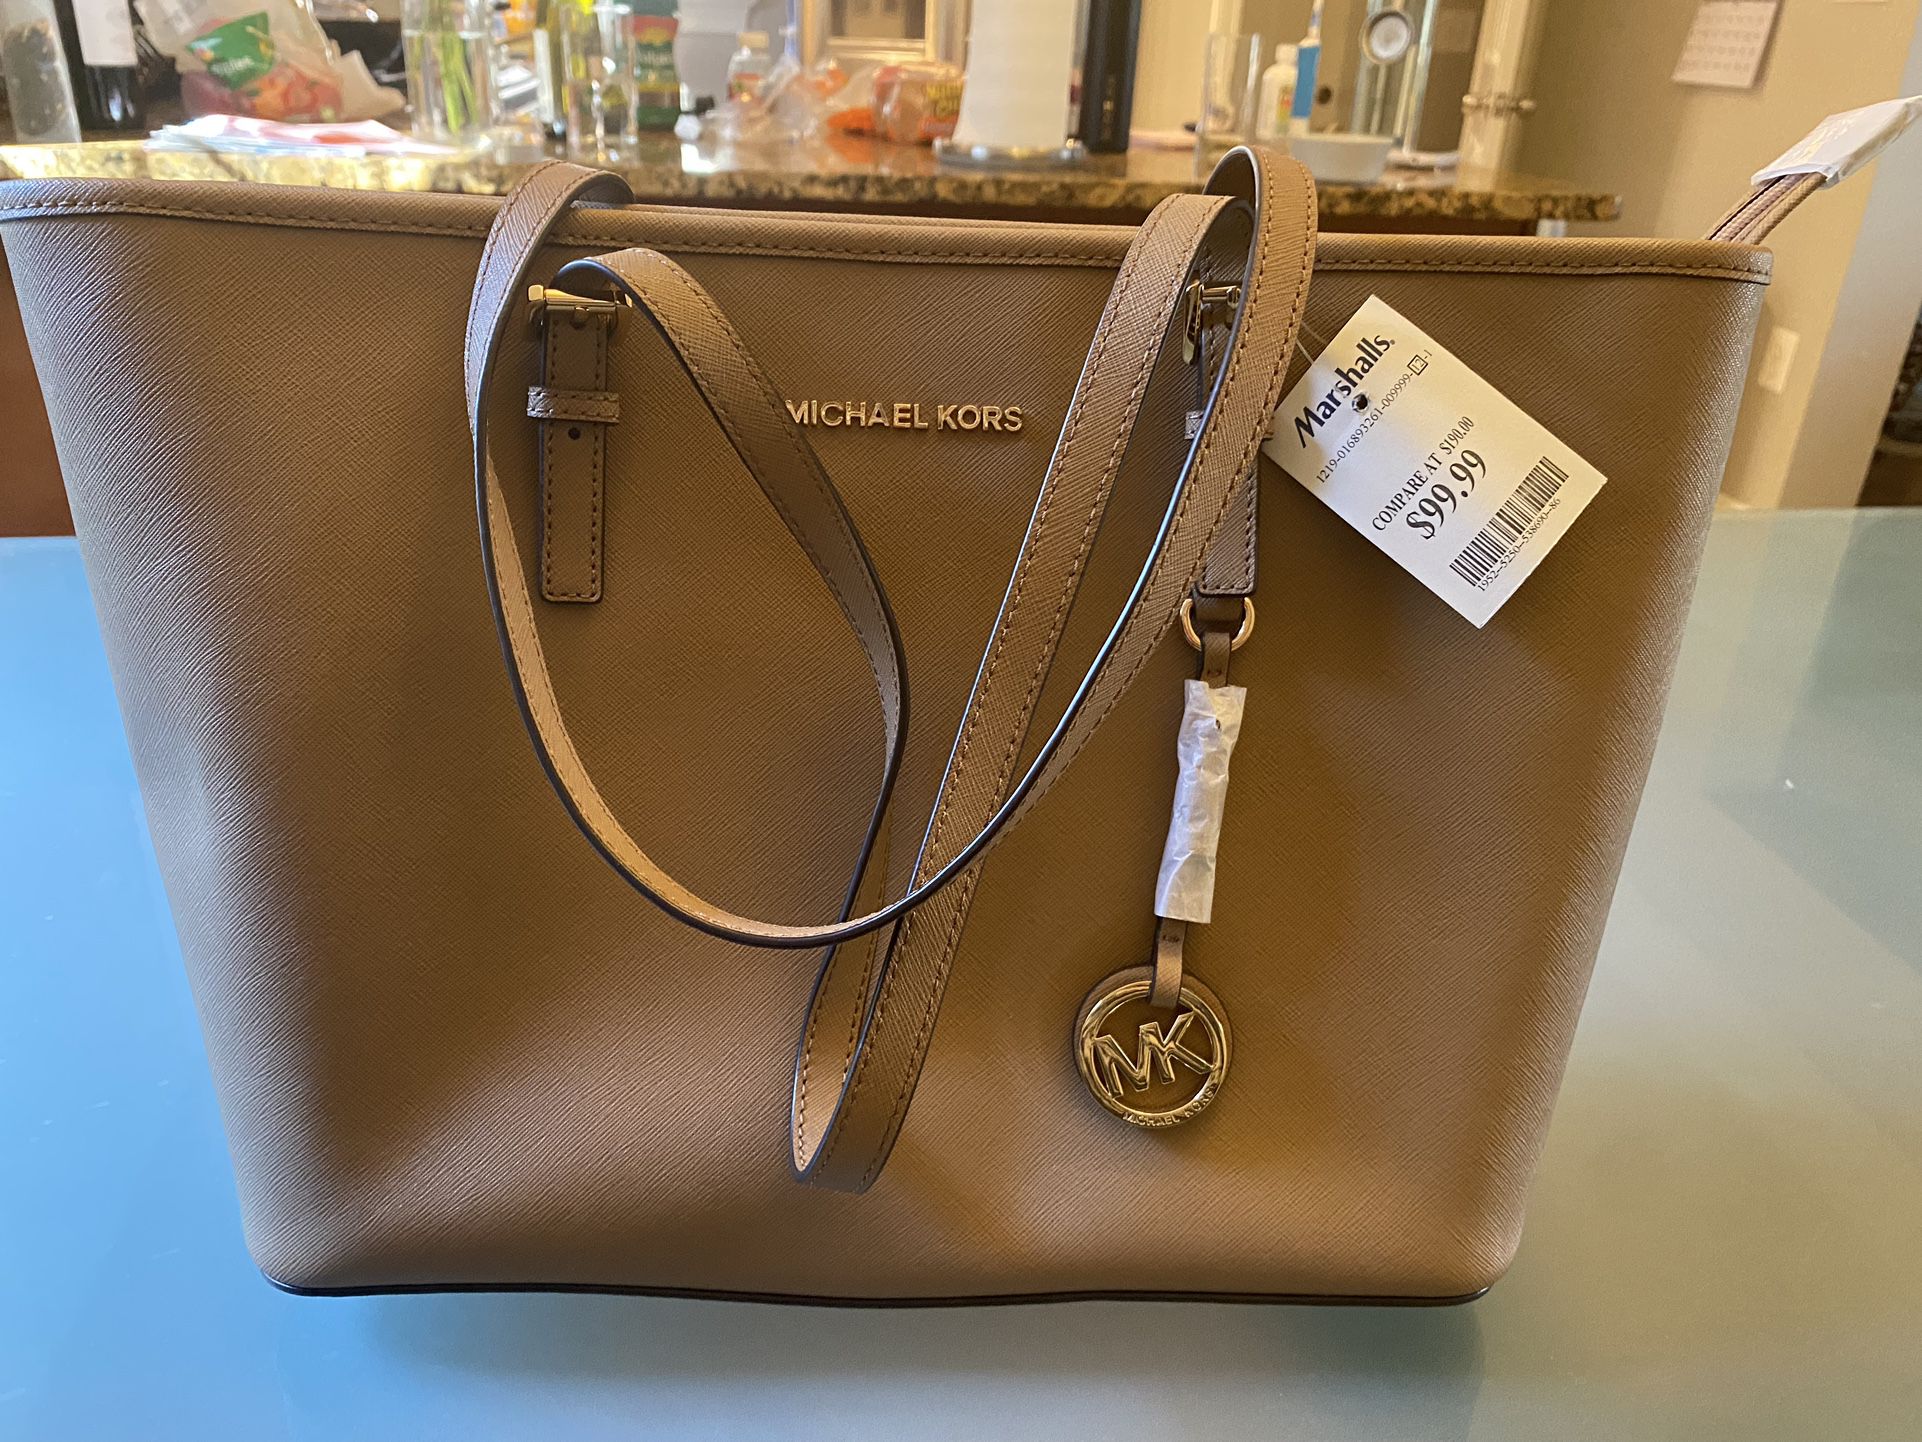 New Michael Kors Tote Bag / Purse for Sale in Falls Church, VA - OfferUp